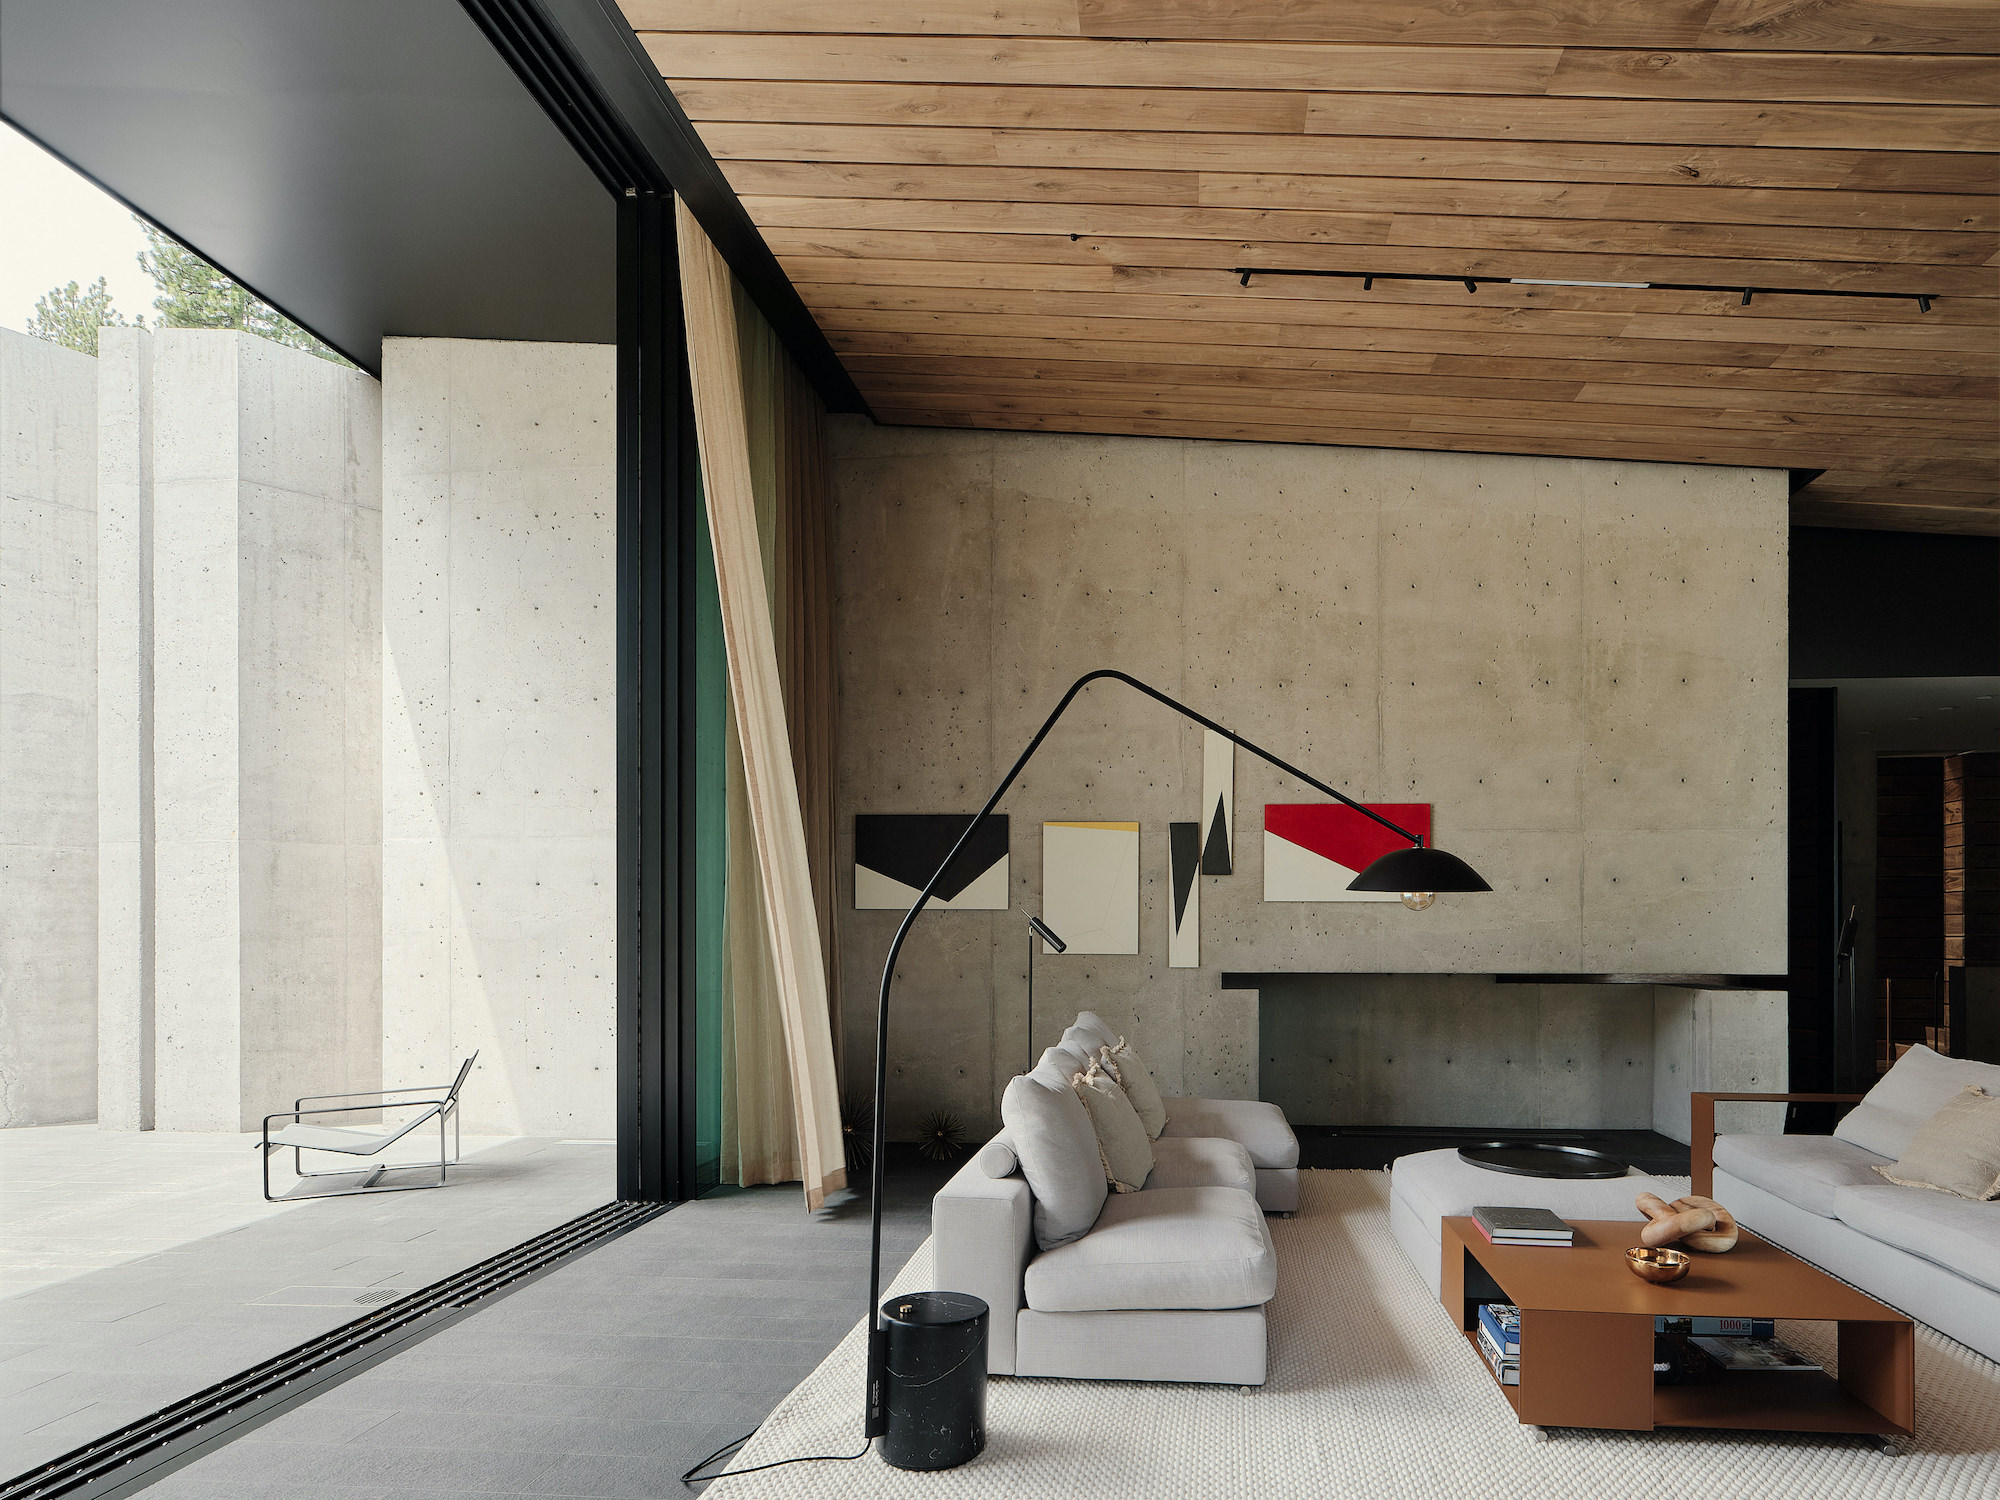 A minimal palette of materials: wood, concrete and steel define the spaces of Lookout House